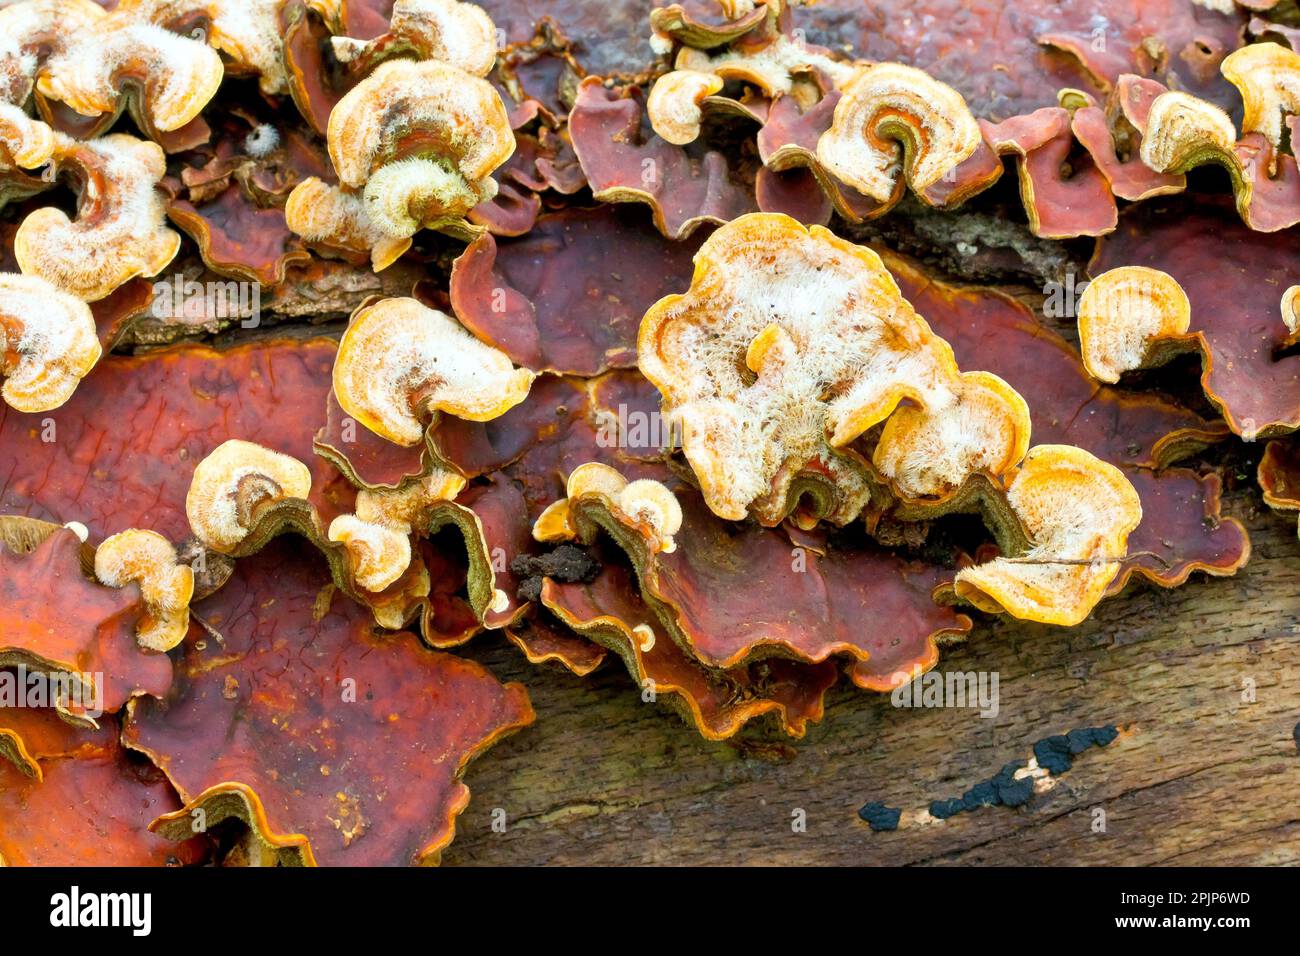 Close up of the fruiting bodies of the fungus stereum hirsutum or Hairy Curtain Crust growing over a rotting piece of wood. Stock Photo